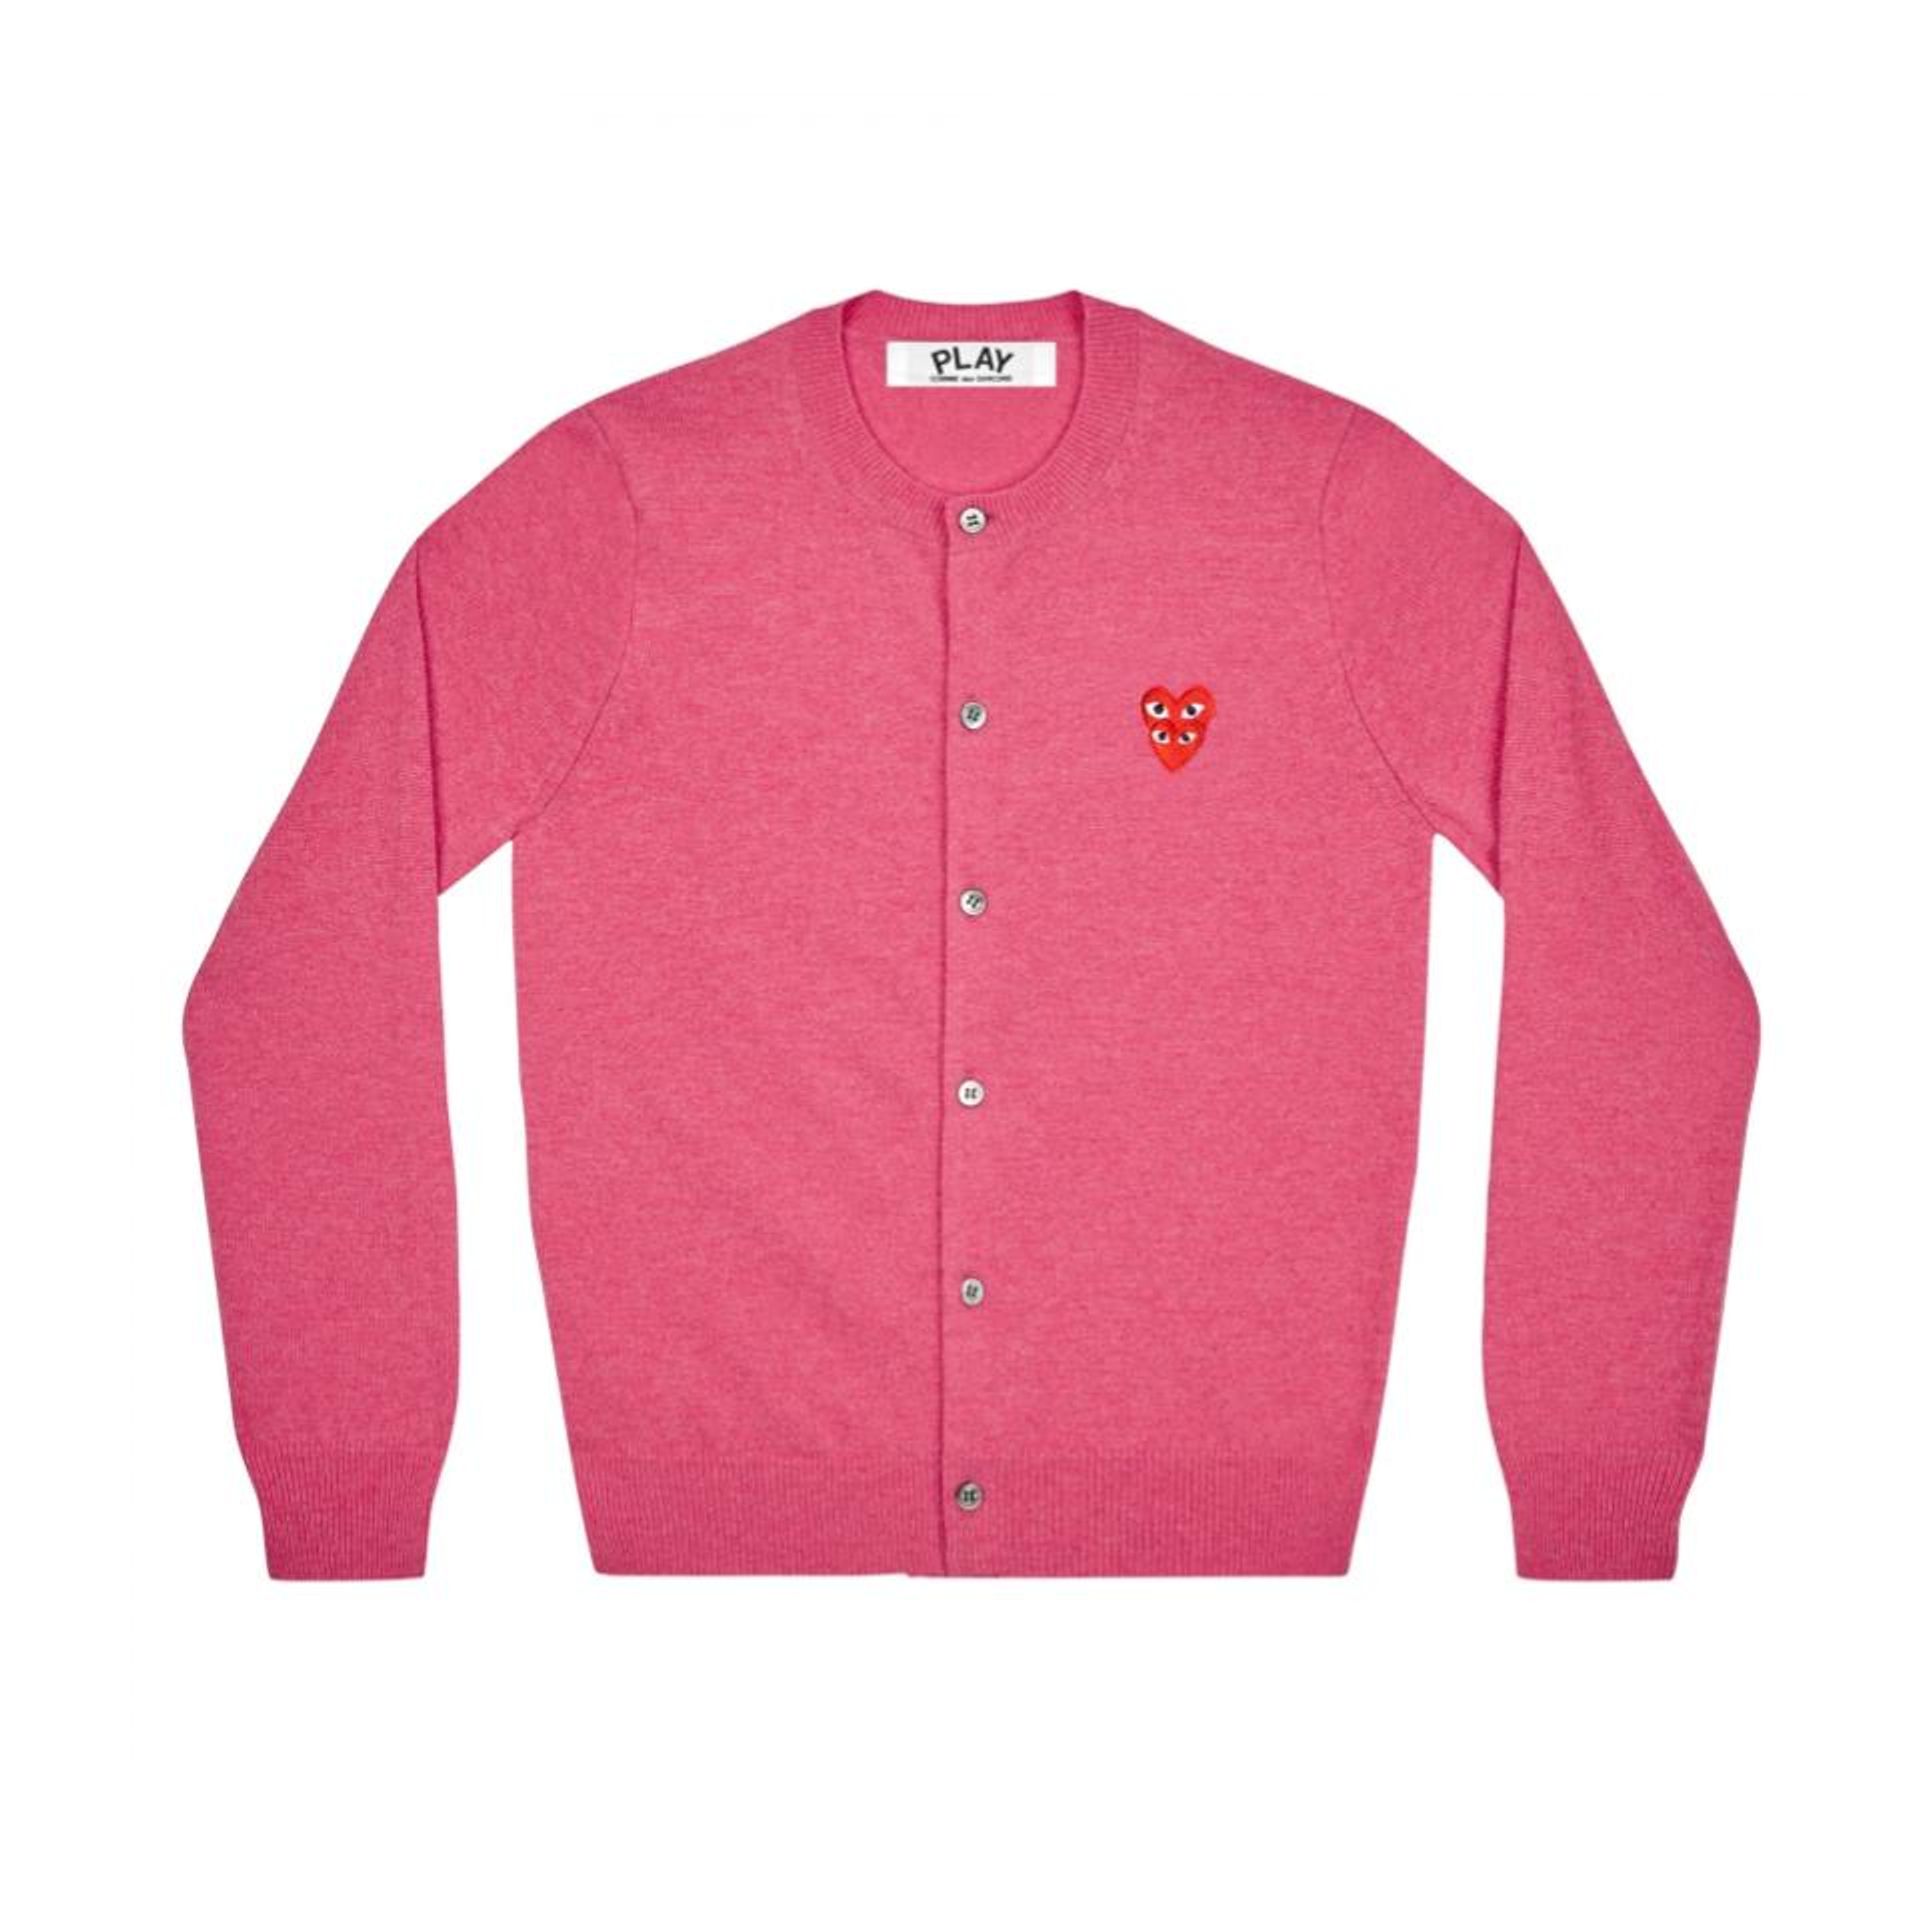 PLAY Comme des Garcons Double Eye Ladies' Cardigan Pink